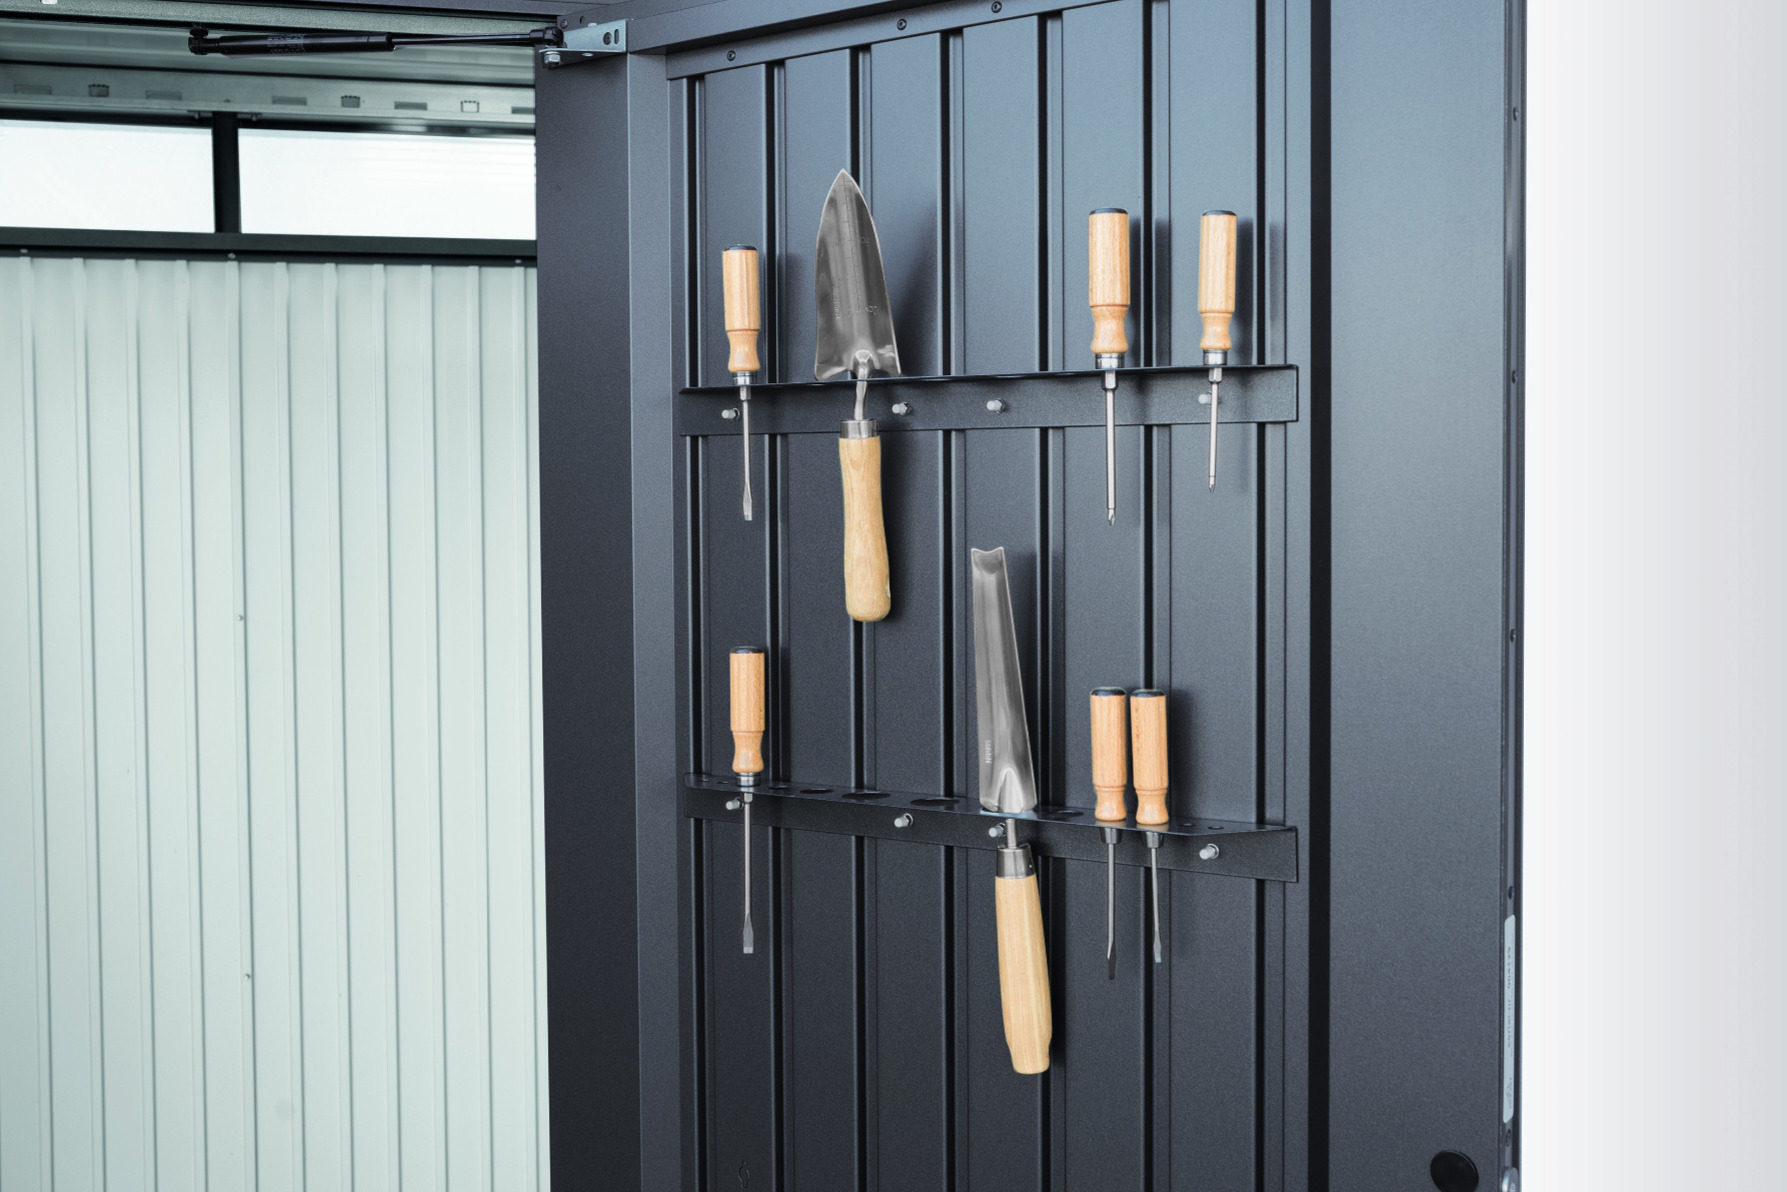 Biohort Highline Equipment Lockers, accessories, organiser system for tools from Owen Chubb Landscapers, Ireland